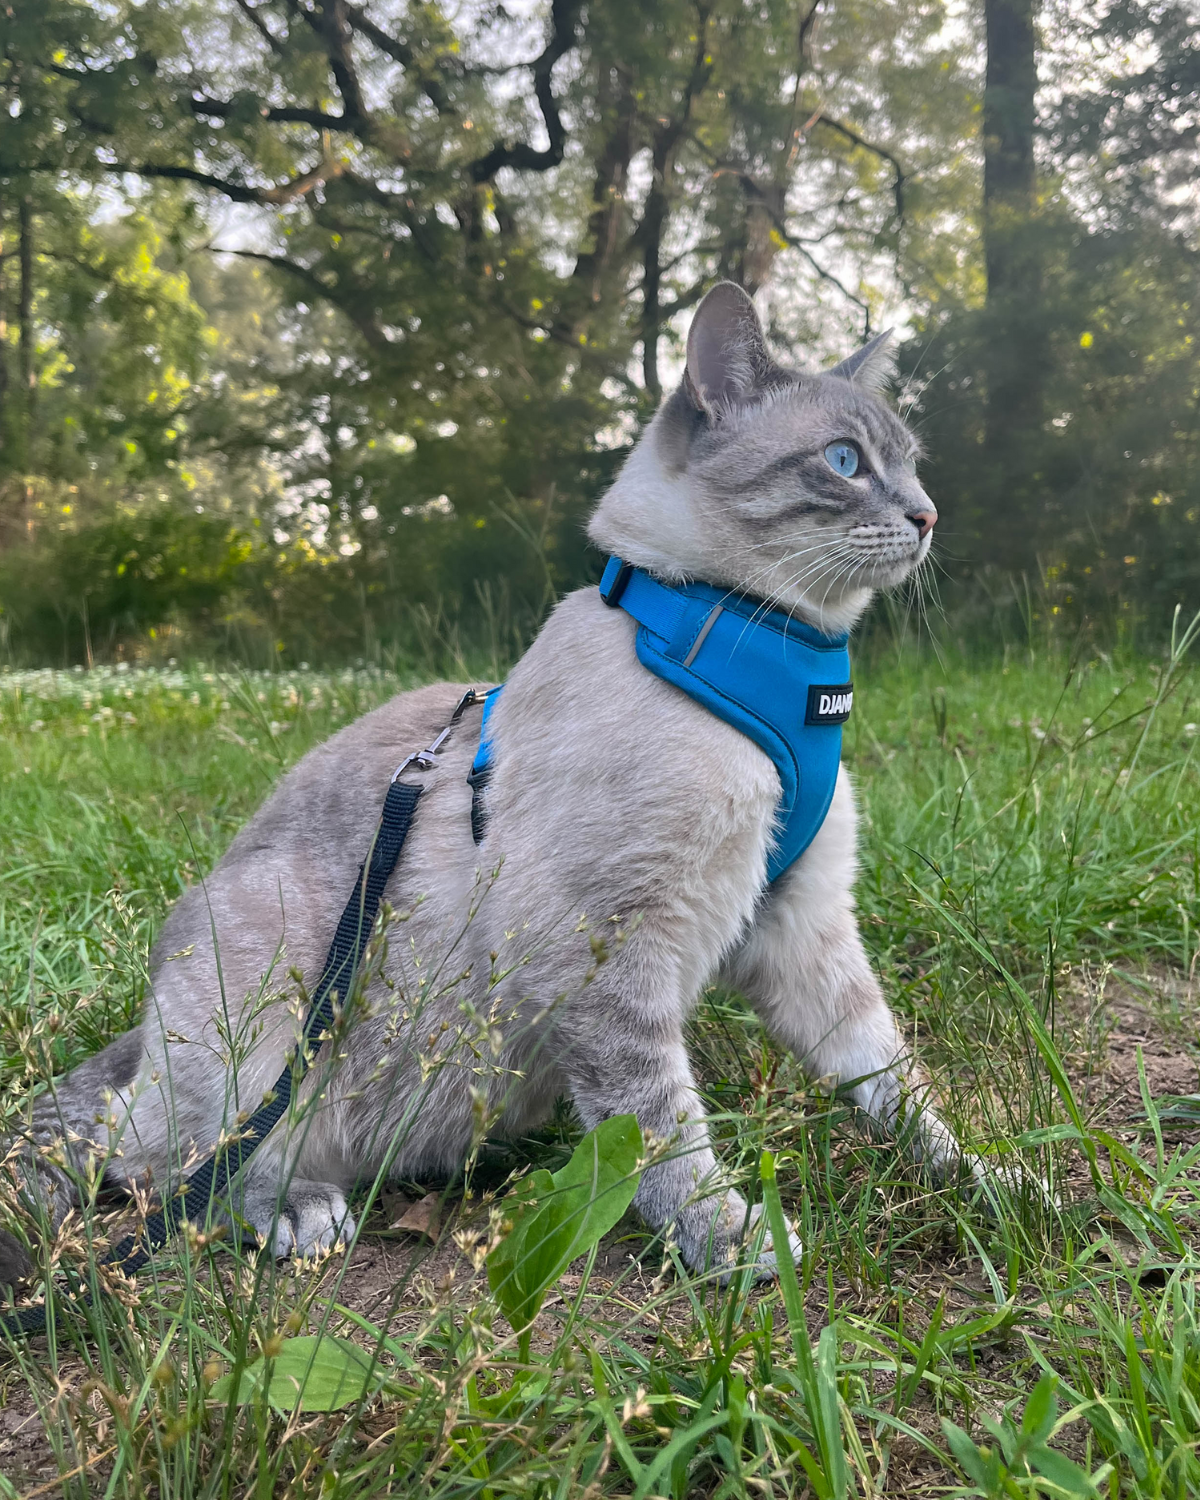 Not sure what size DJANGO cat harness to order? Email hello@djangobrand.com for sizing help. We're here and happy to help! - djangobrand.com